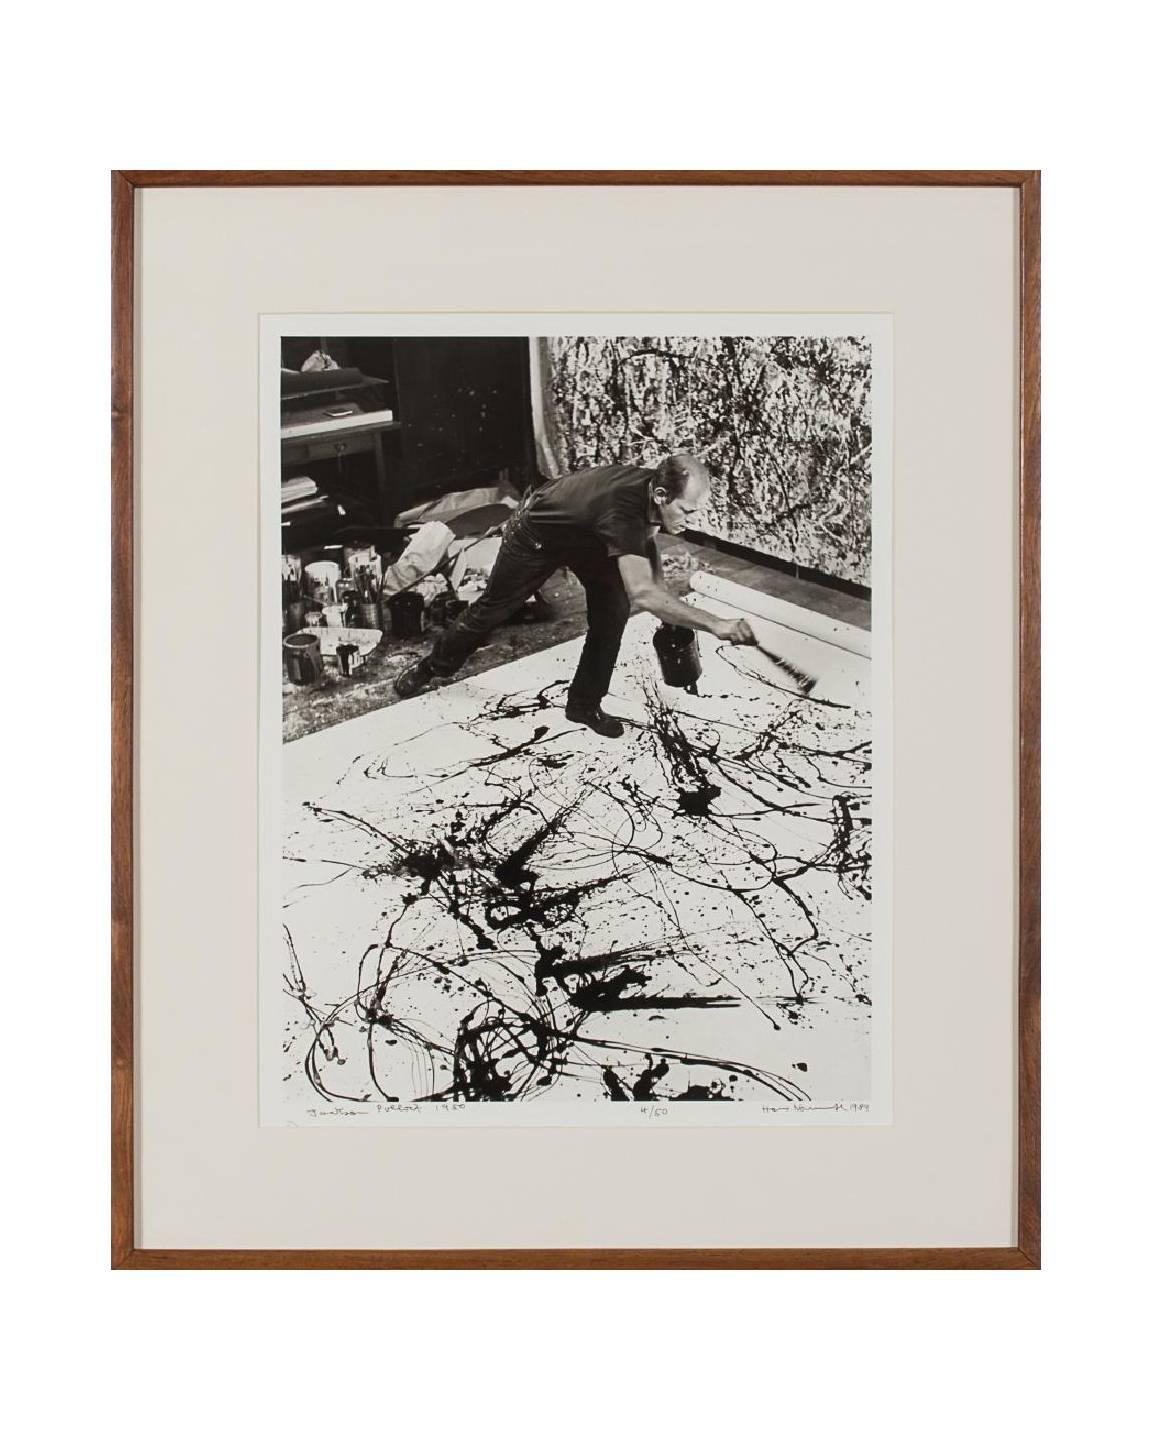 Artist: Hans Namuth (1915-1990)
Title: Jackson Pollock at Work, 1950 (Printed in 1989)
Medium: Silver gelatin print.
Edition: both 4/50
Both titled, editioned, signed and dated on the lower margin as shown. 
Framed dimensions: 24.5 H x 20.5